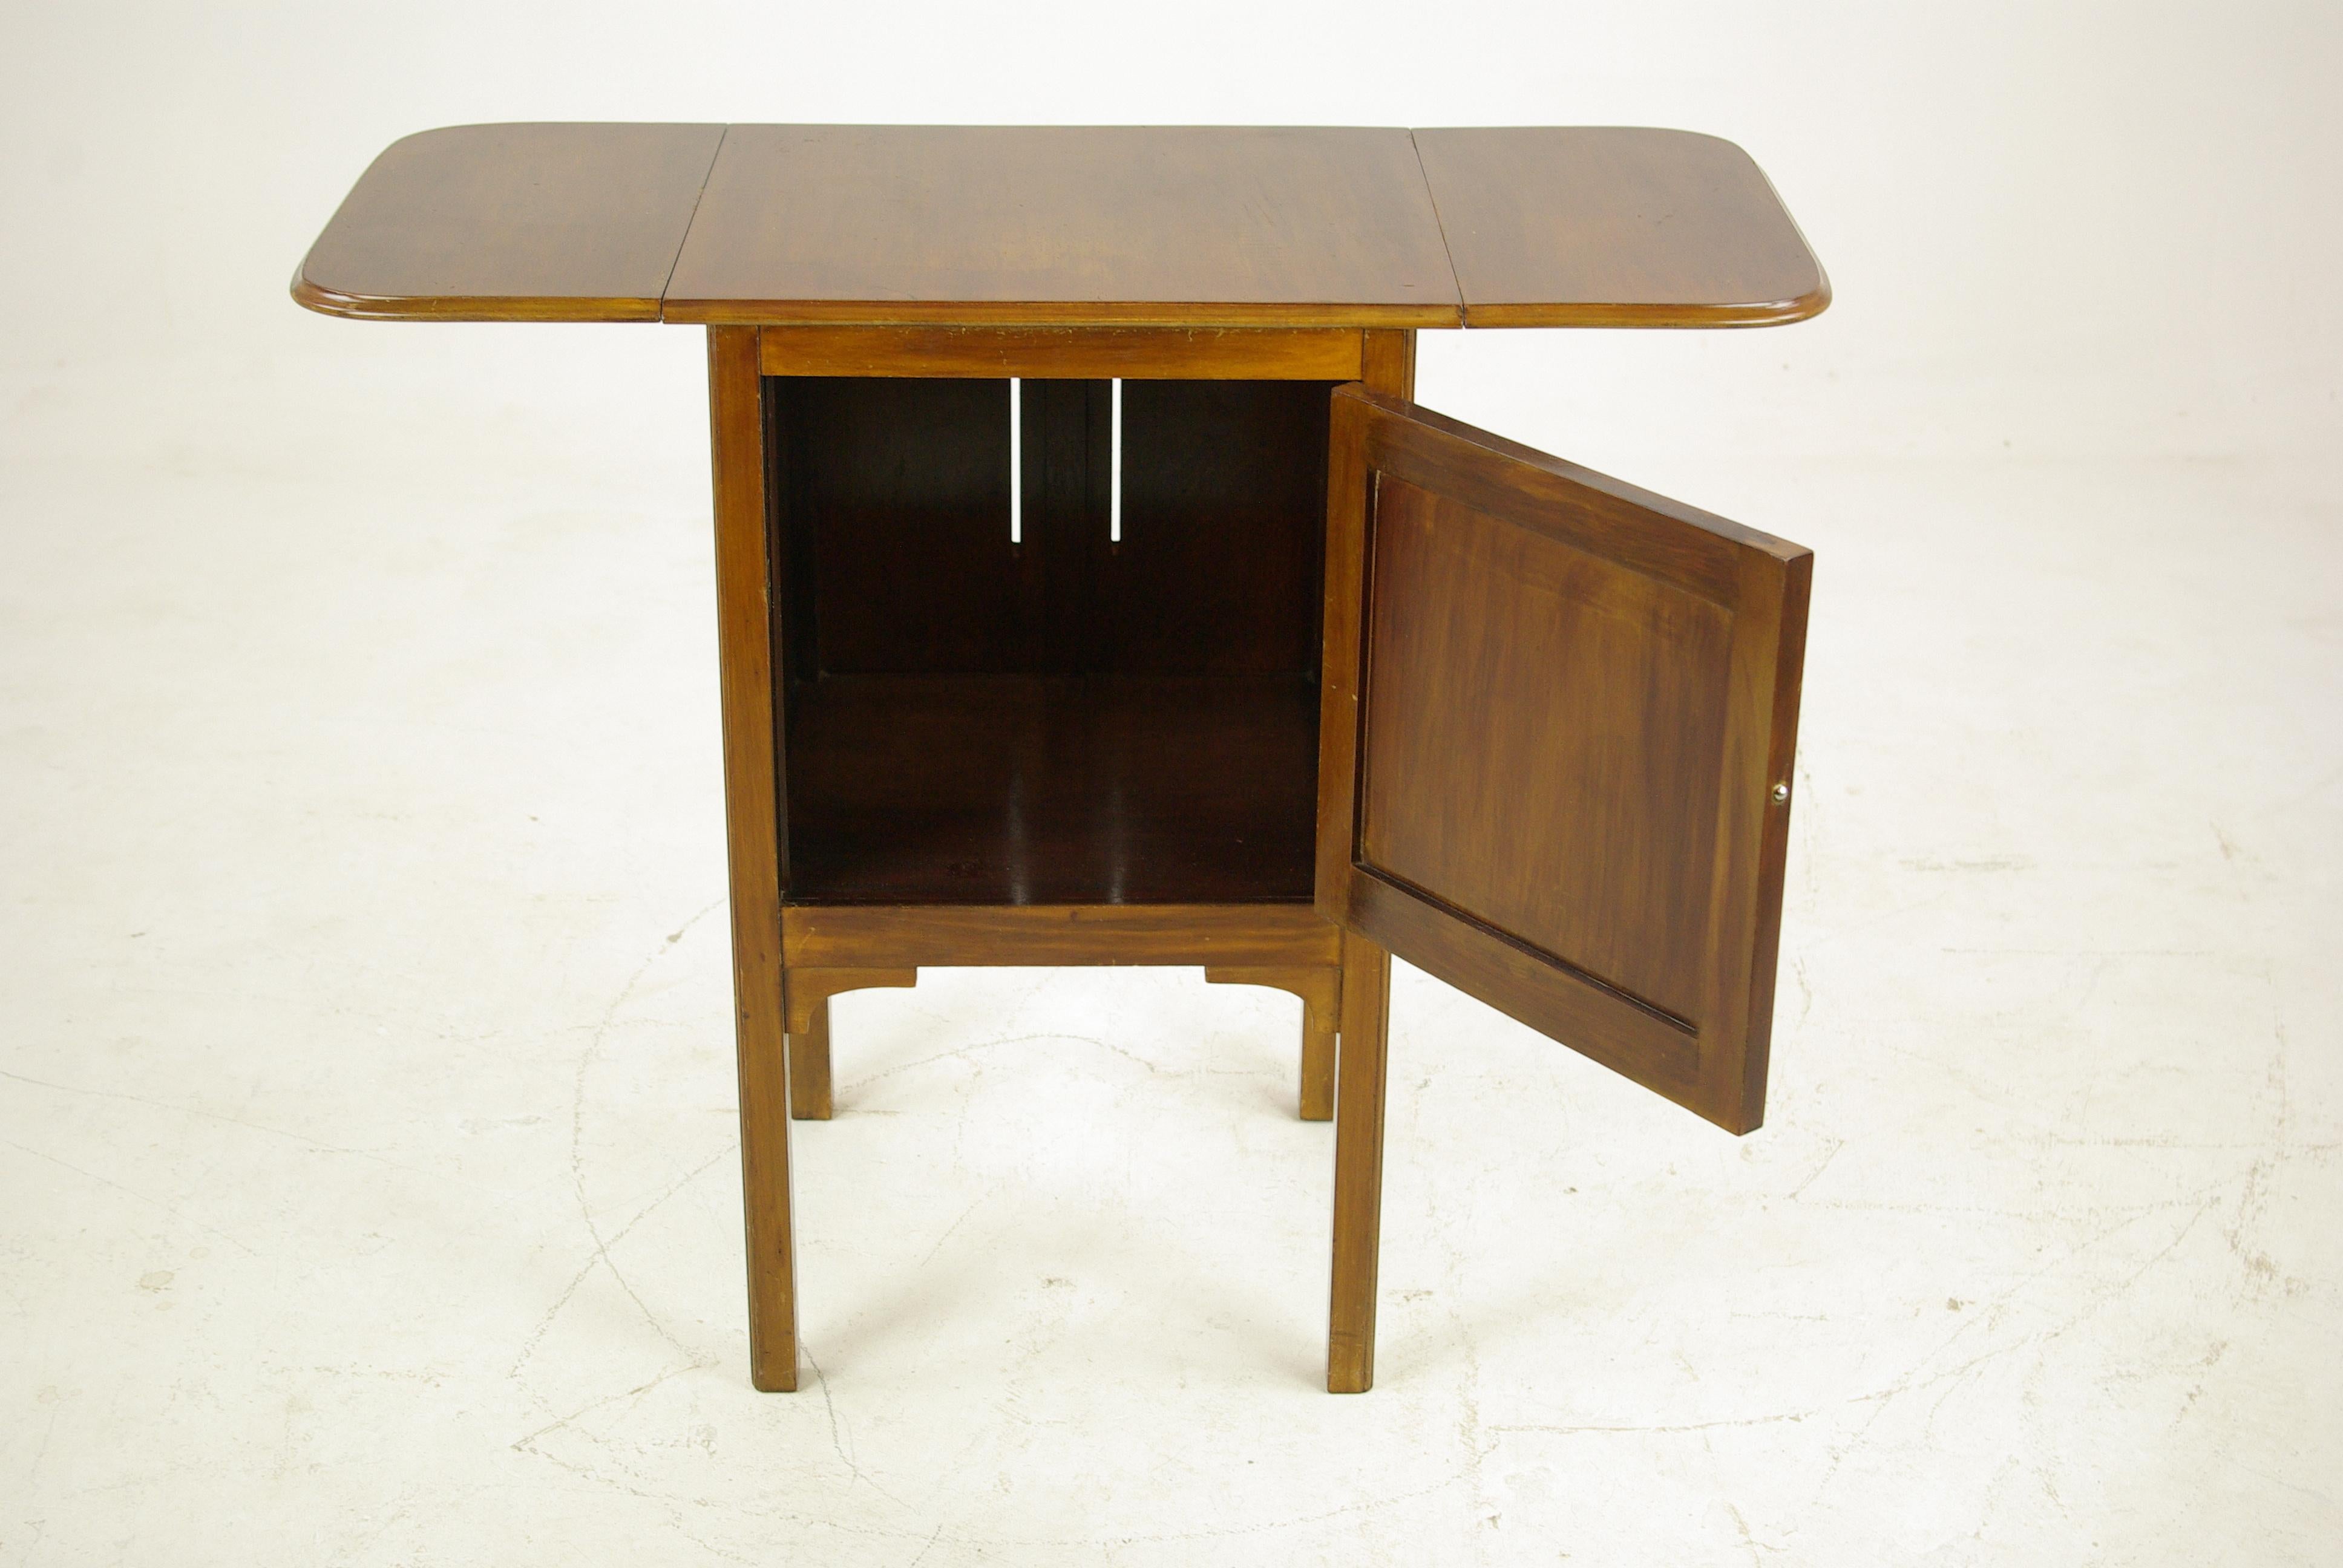 Scottish Vintage Walnut Nightstand, Lamp Table with Drop Leaves, Scotland 1930, H029